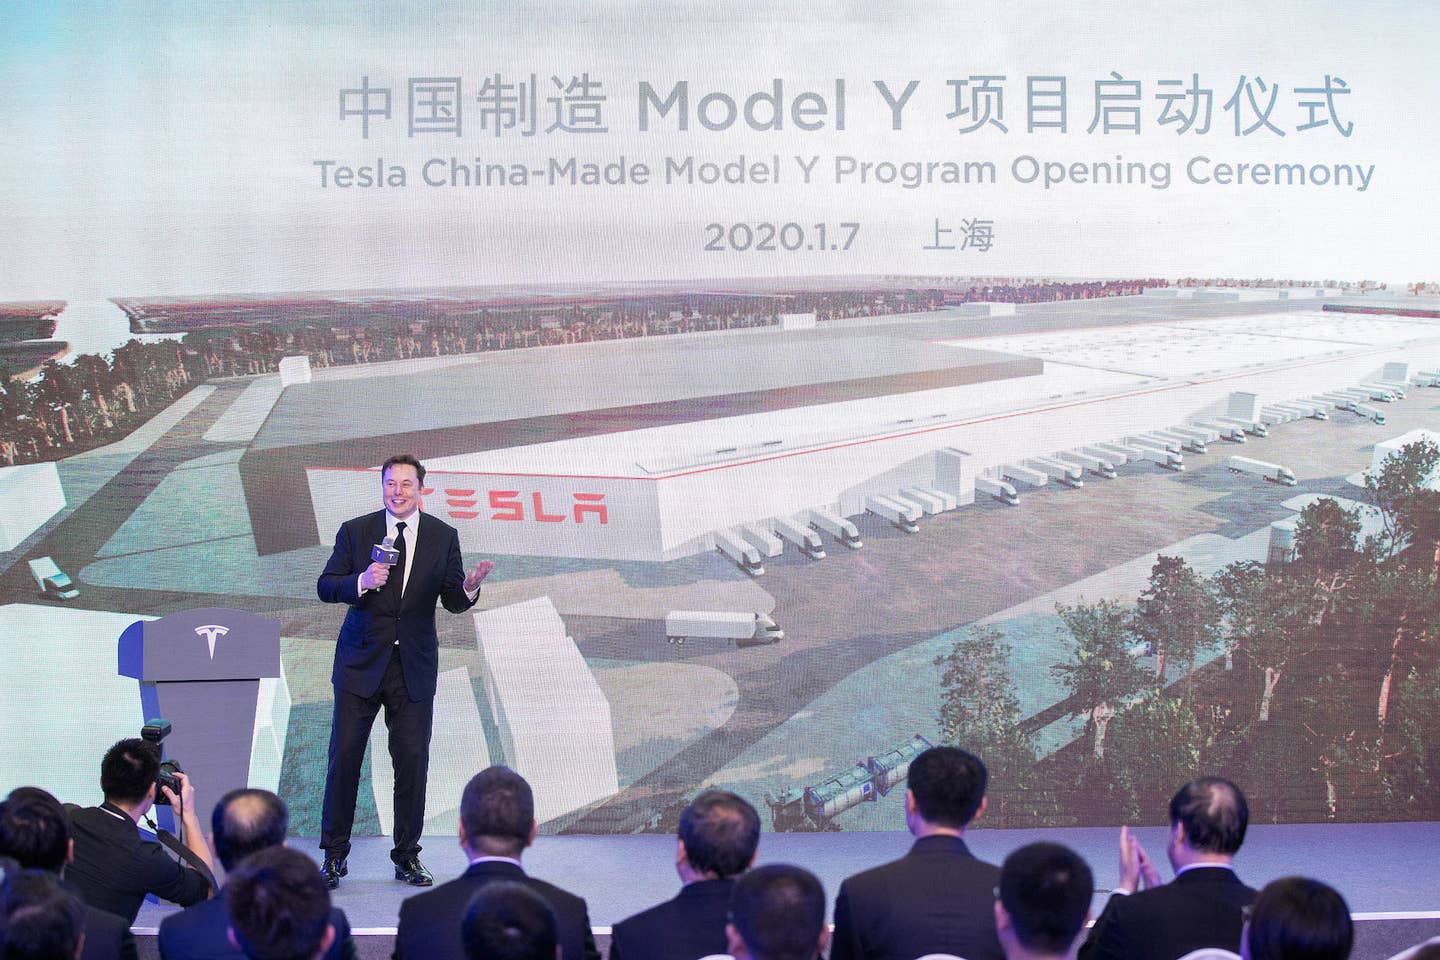 Tesla CEO Elon Musk speaks at the Tesla China-Made Model Y Program Opening Ceremony in east China's Shanghai, Jan. 7, 2020